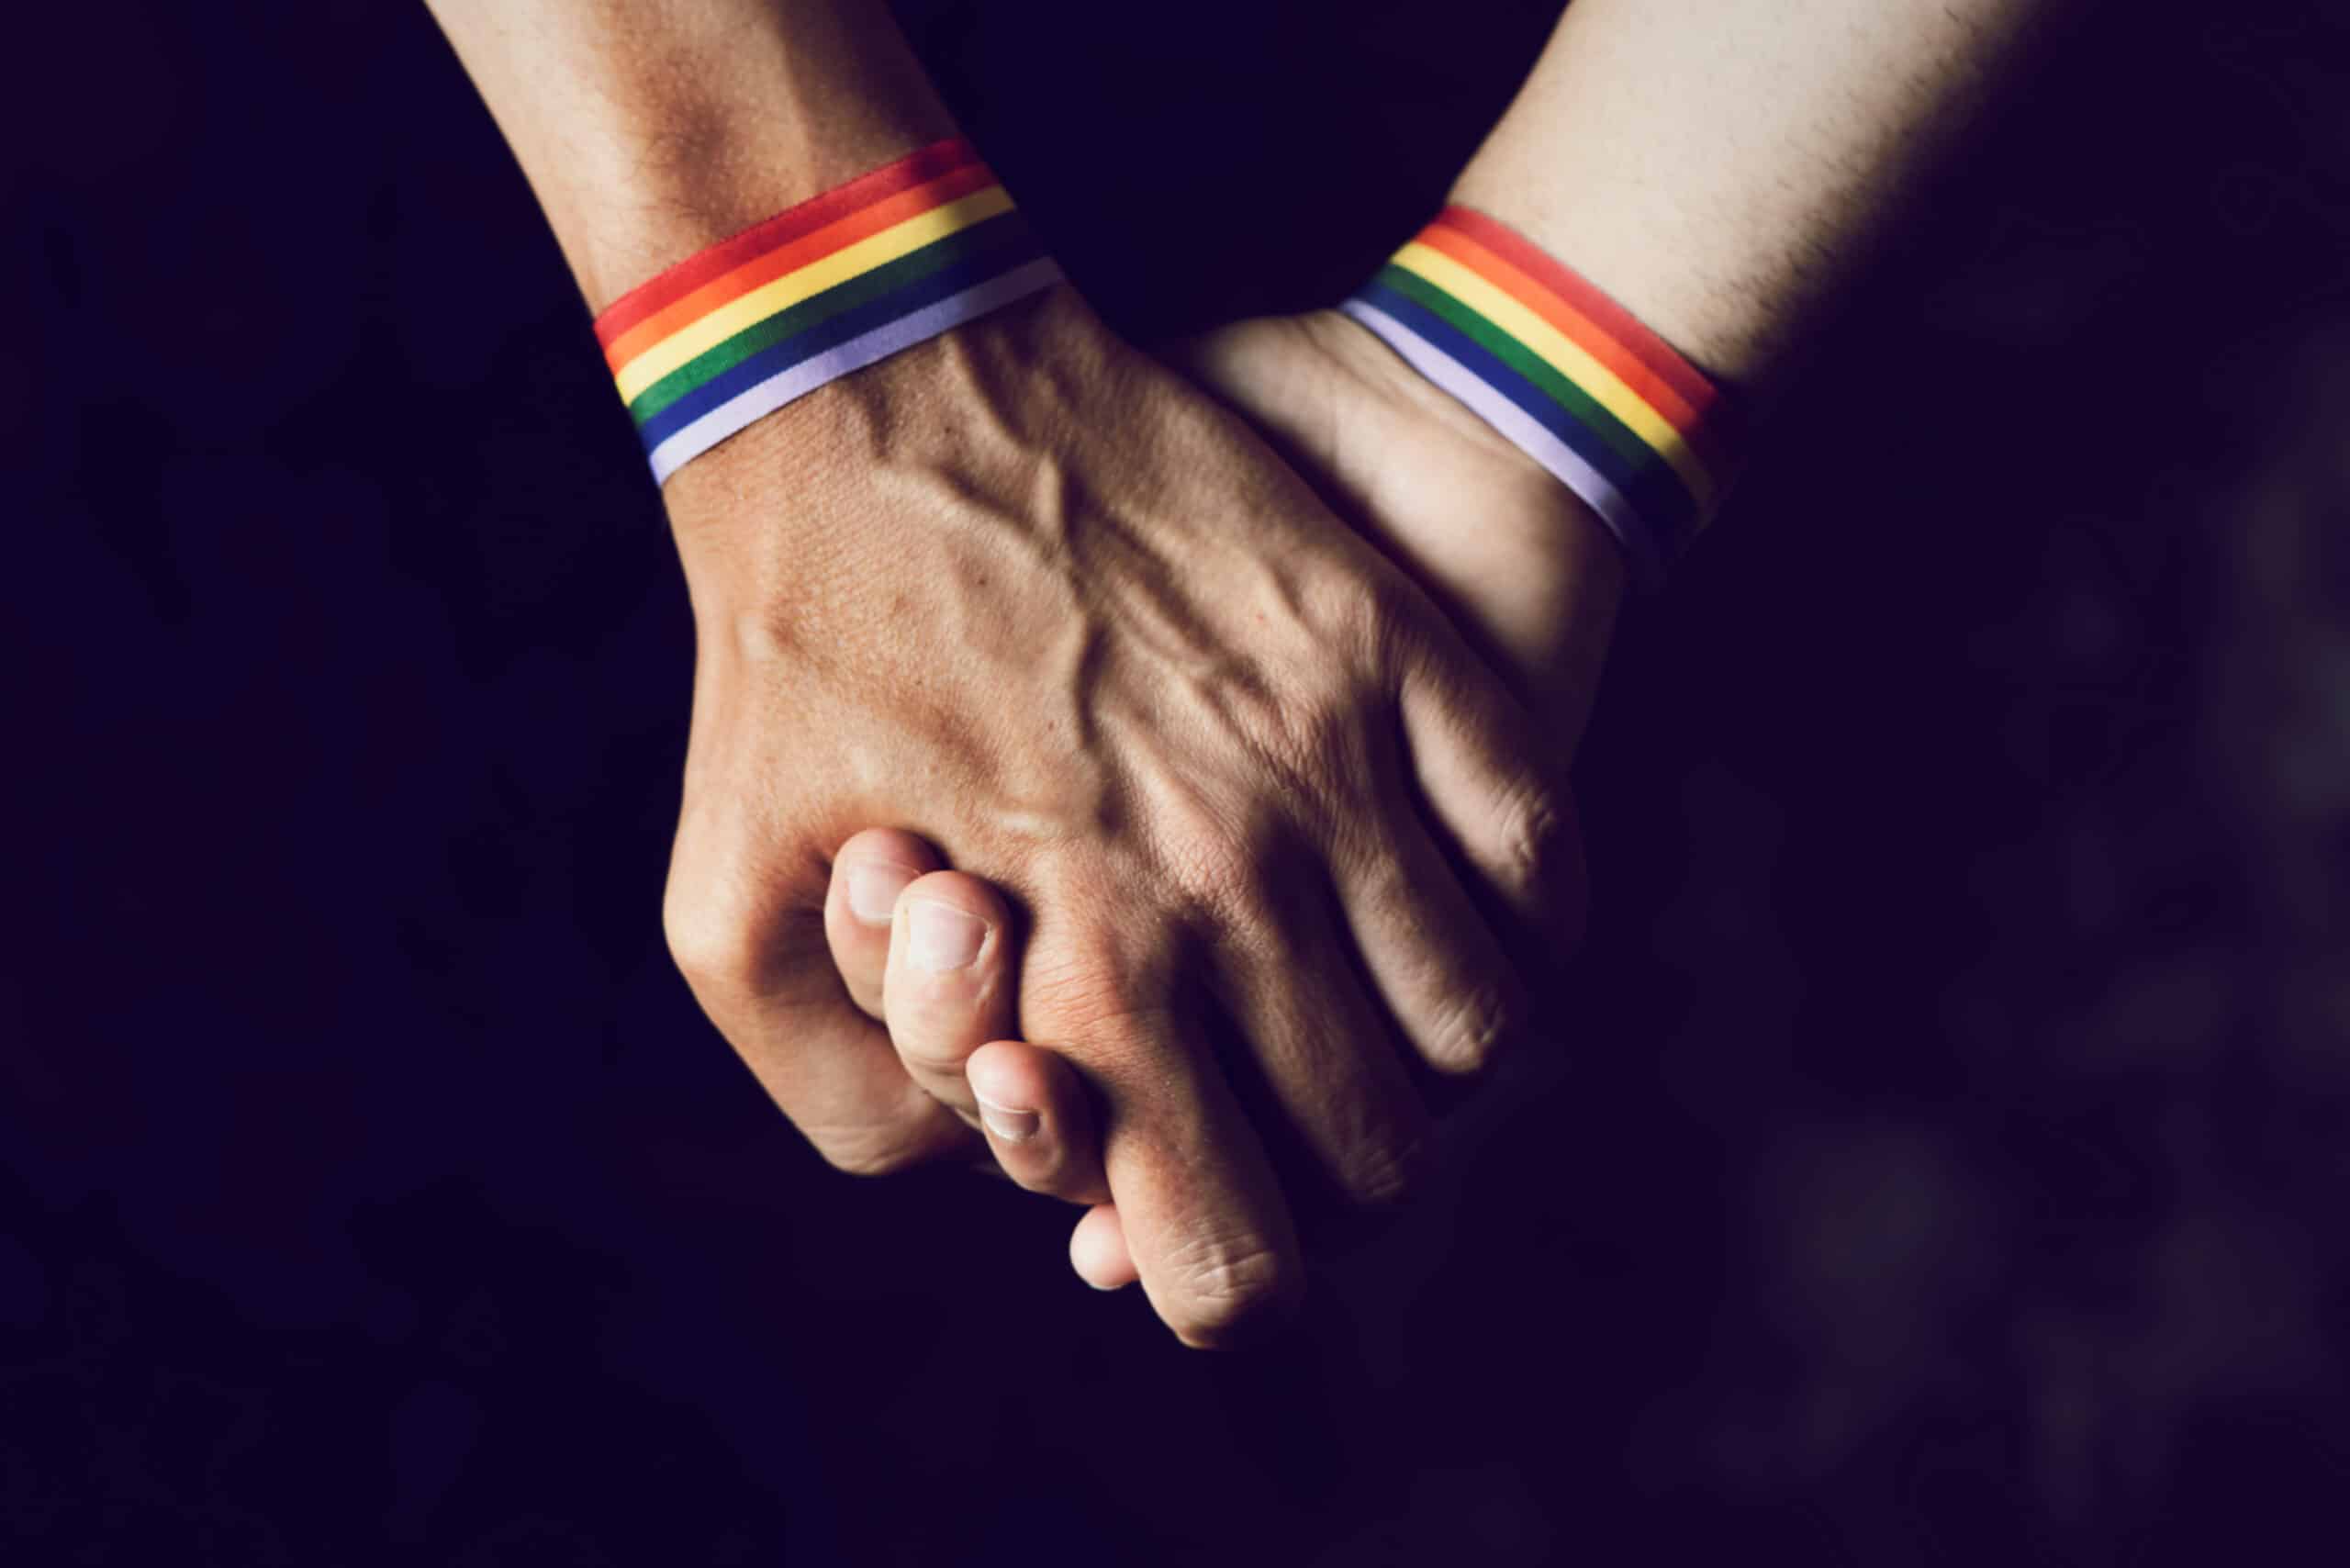 Mental Health and Substance Abuse in the LGBTQ+ Community